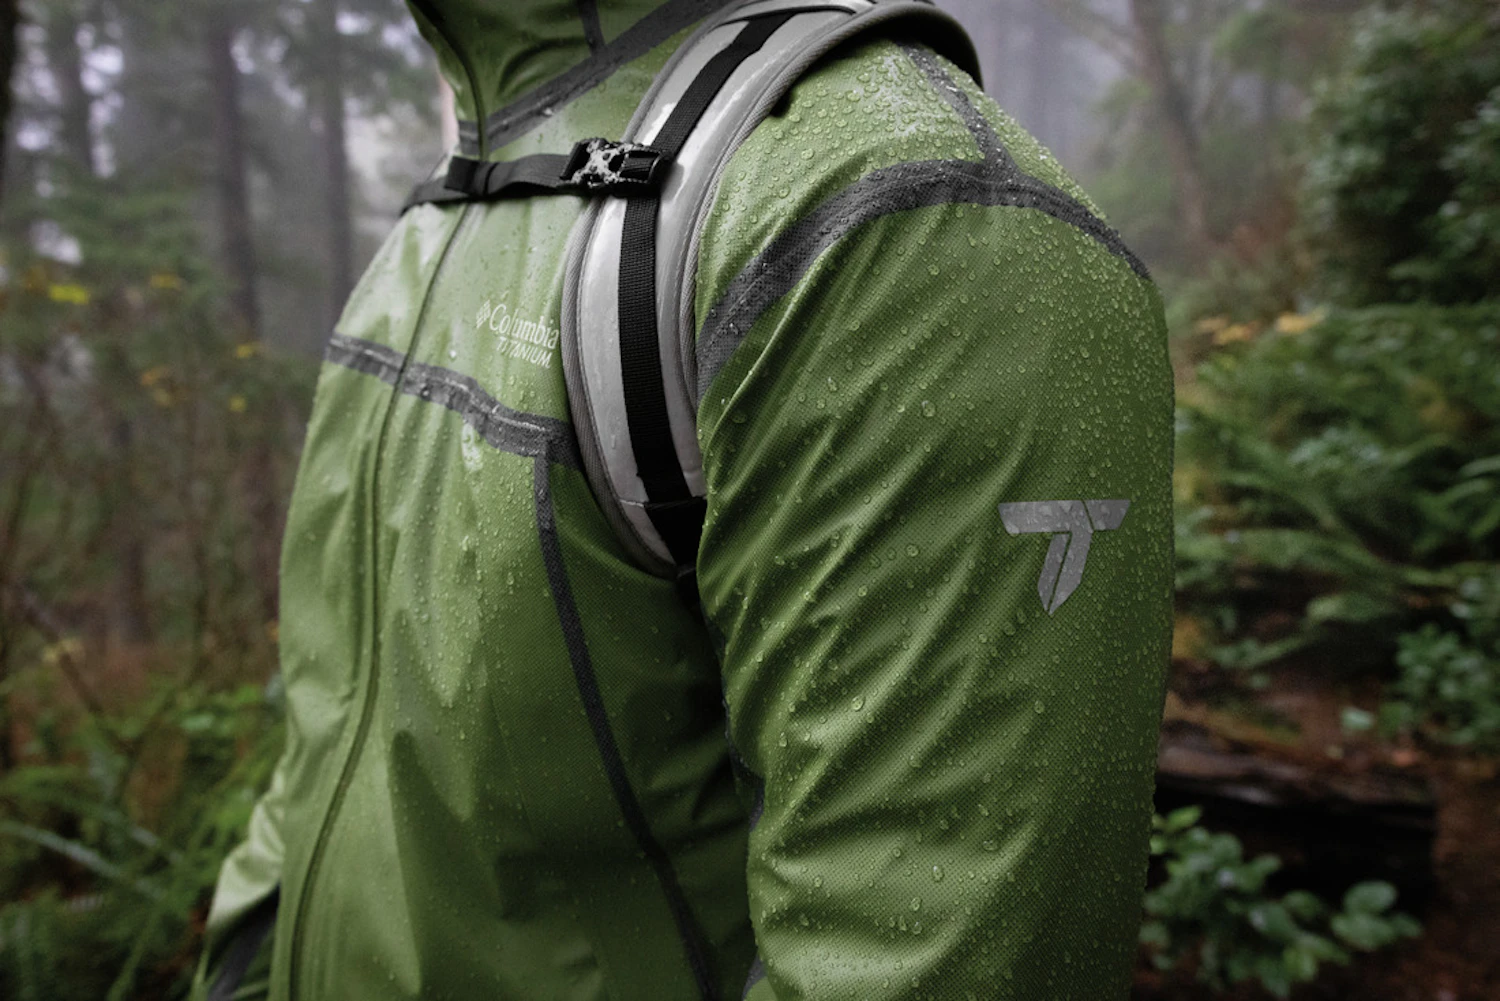 "Outdry" uses a surface waterproof breathable membrane, unlike rainwear that places the membrane as the middle layer, ensuring the outer fabric remains dry and maintaining comfort,